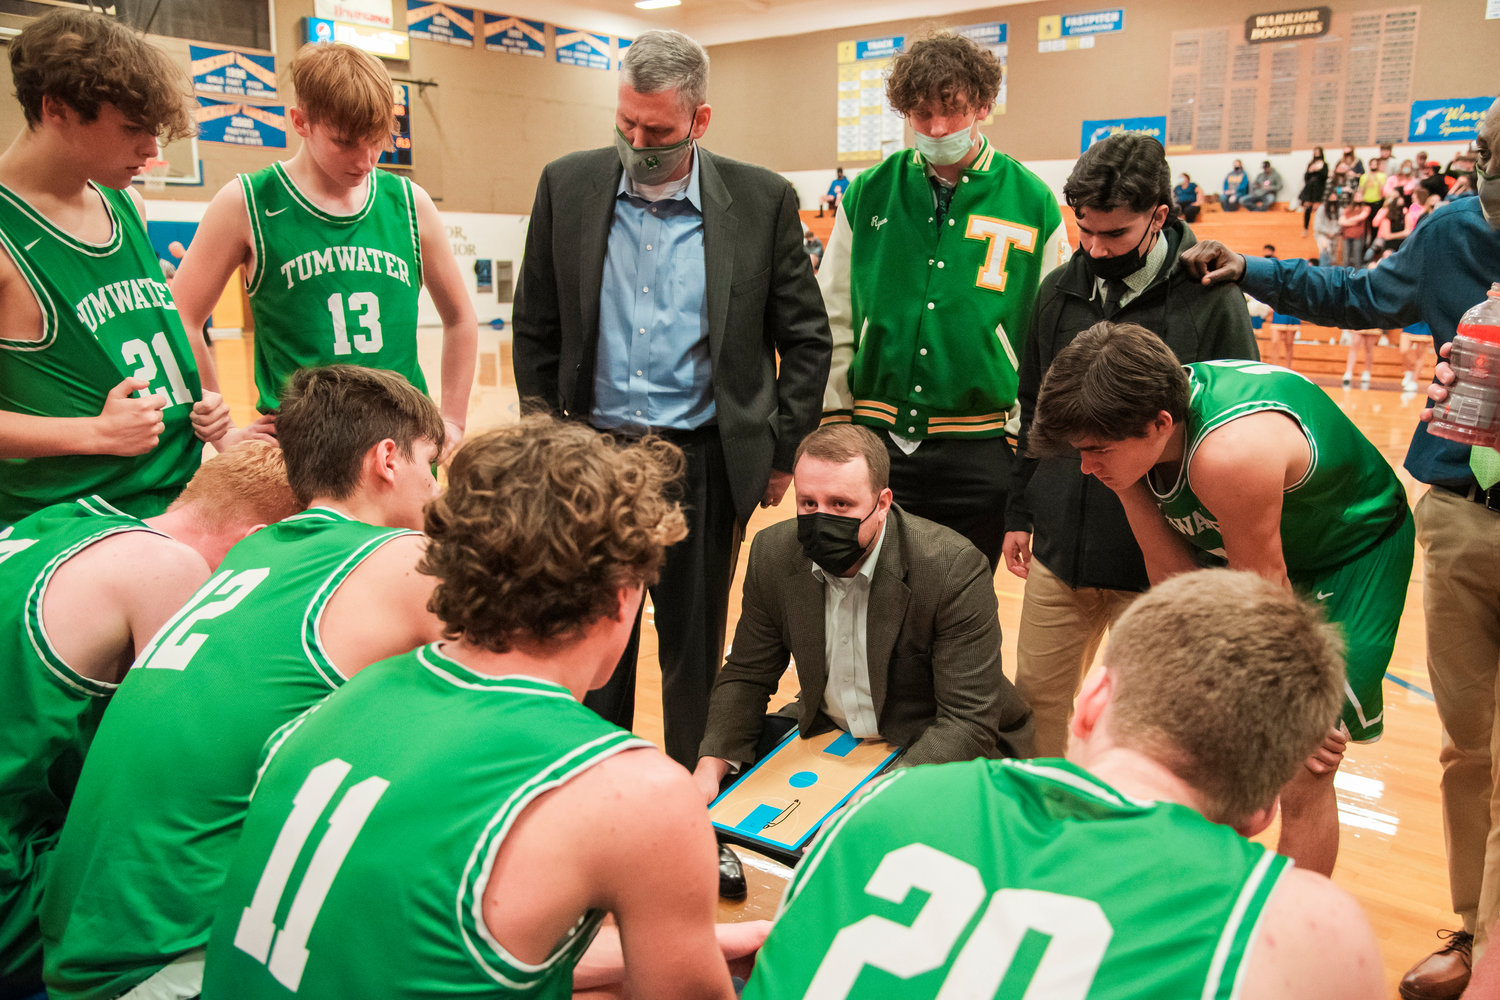 Tumwater Head Coach Josh Wilson talks to athletes during a game Wednesday night in Rochester.